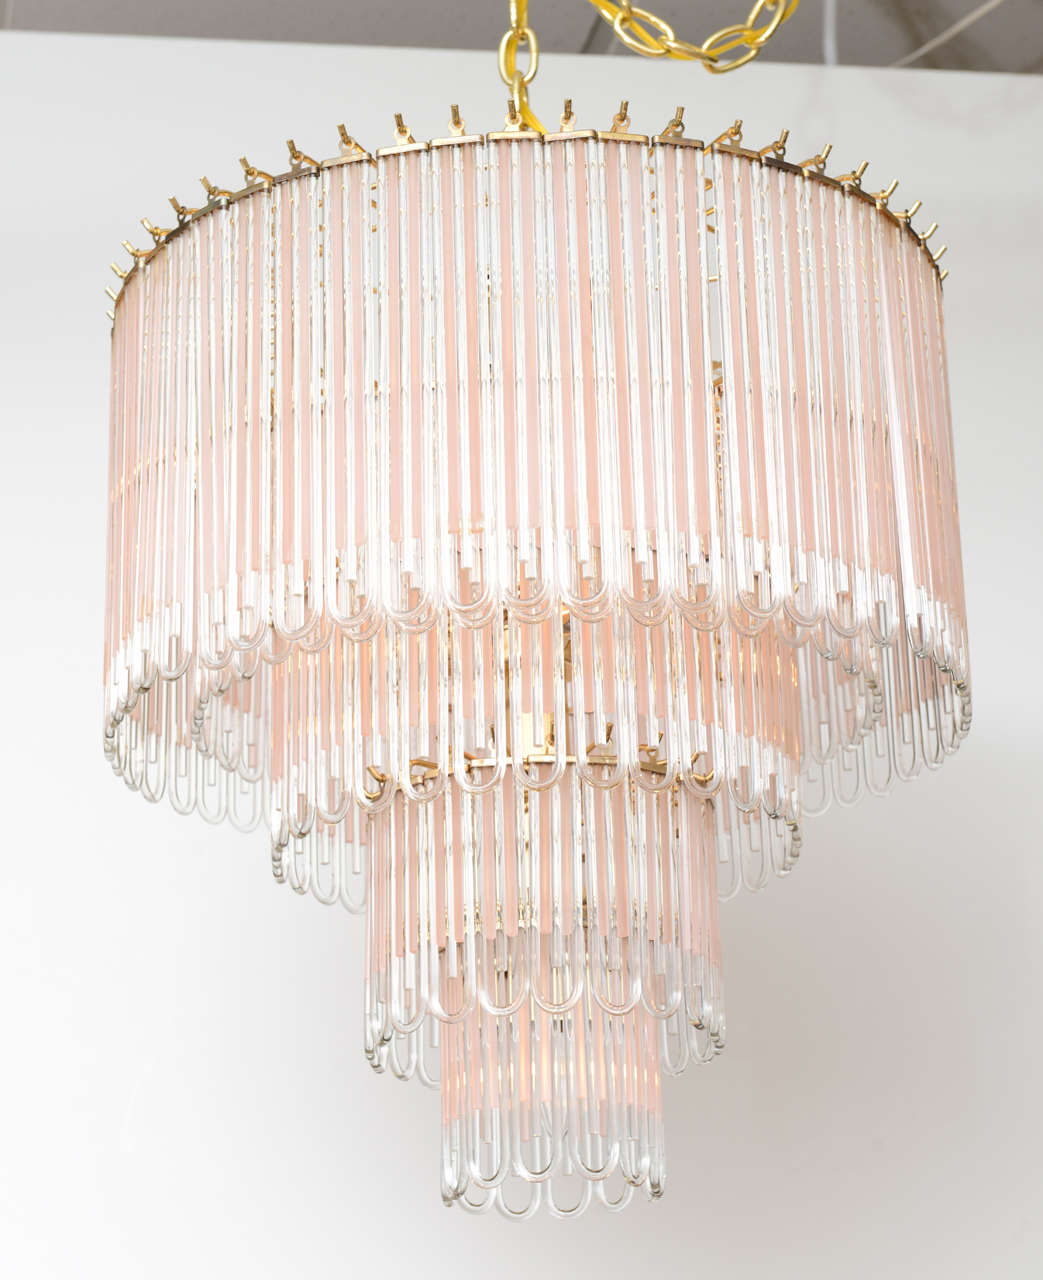 SOLD  Making quite an impression with its five tiers of looped tubes of glass in clear and frosted pink, centered in clear.  With 10 light sources making for exquisite lighting, romantic and graceful.  Heavy brass frame and mounts.

Fixture with